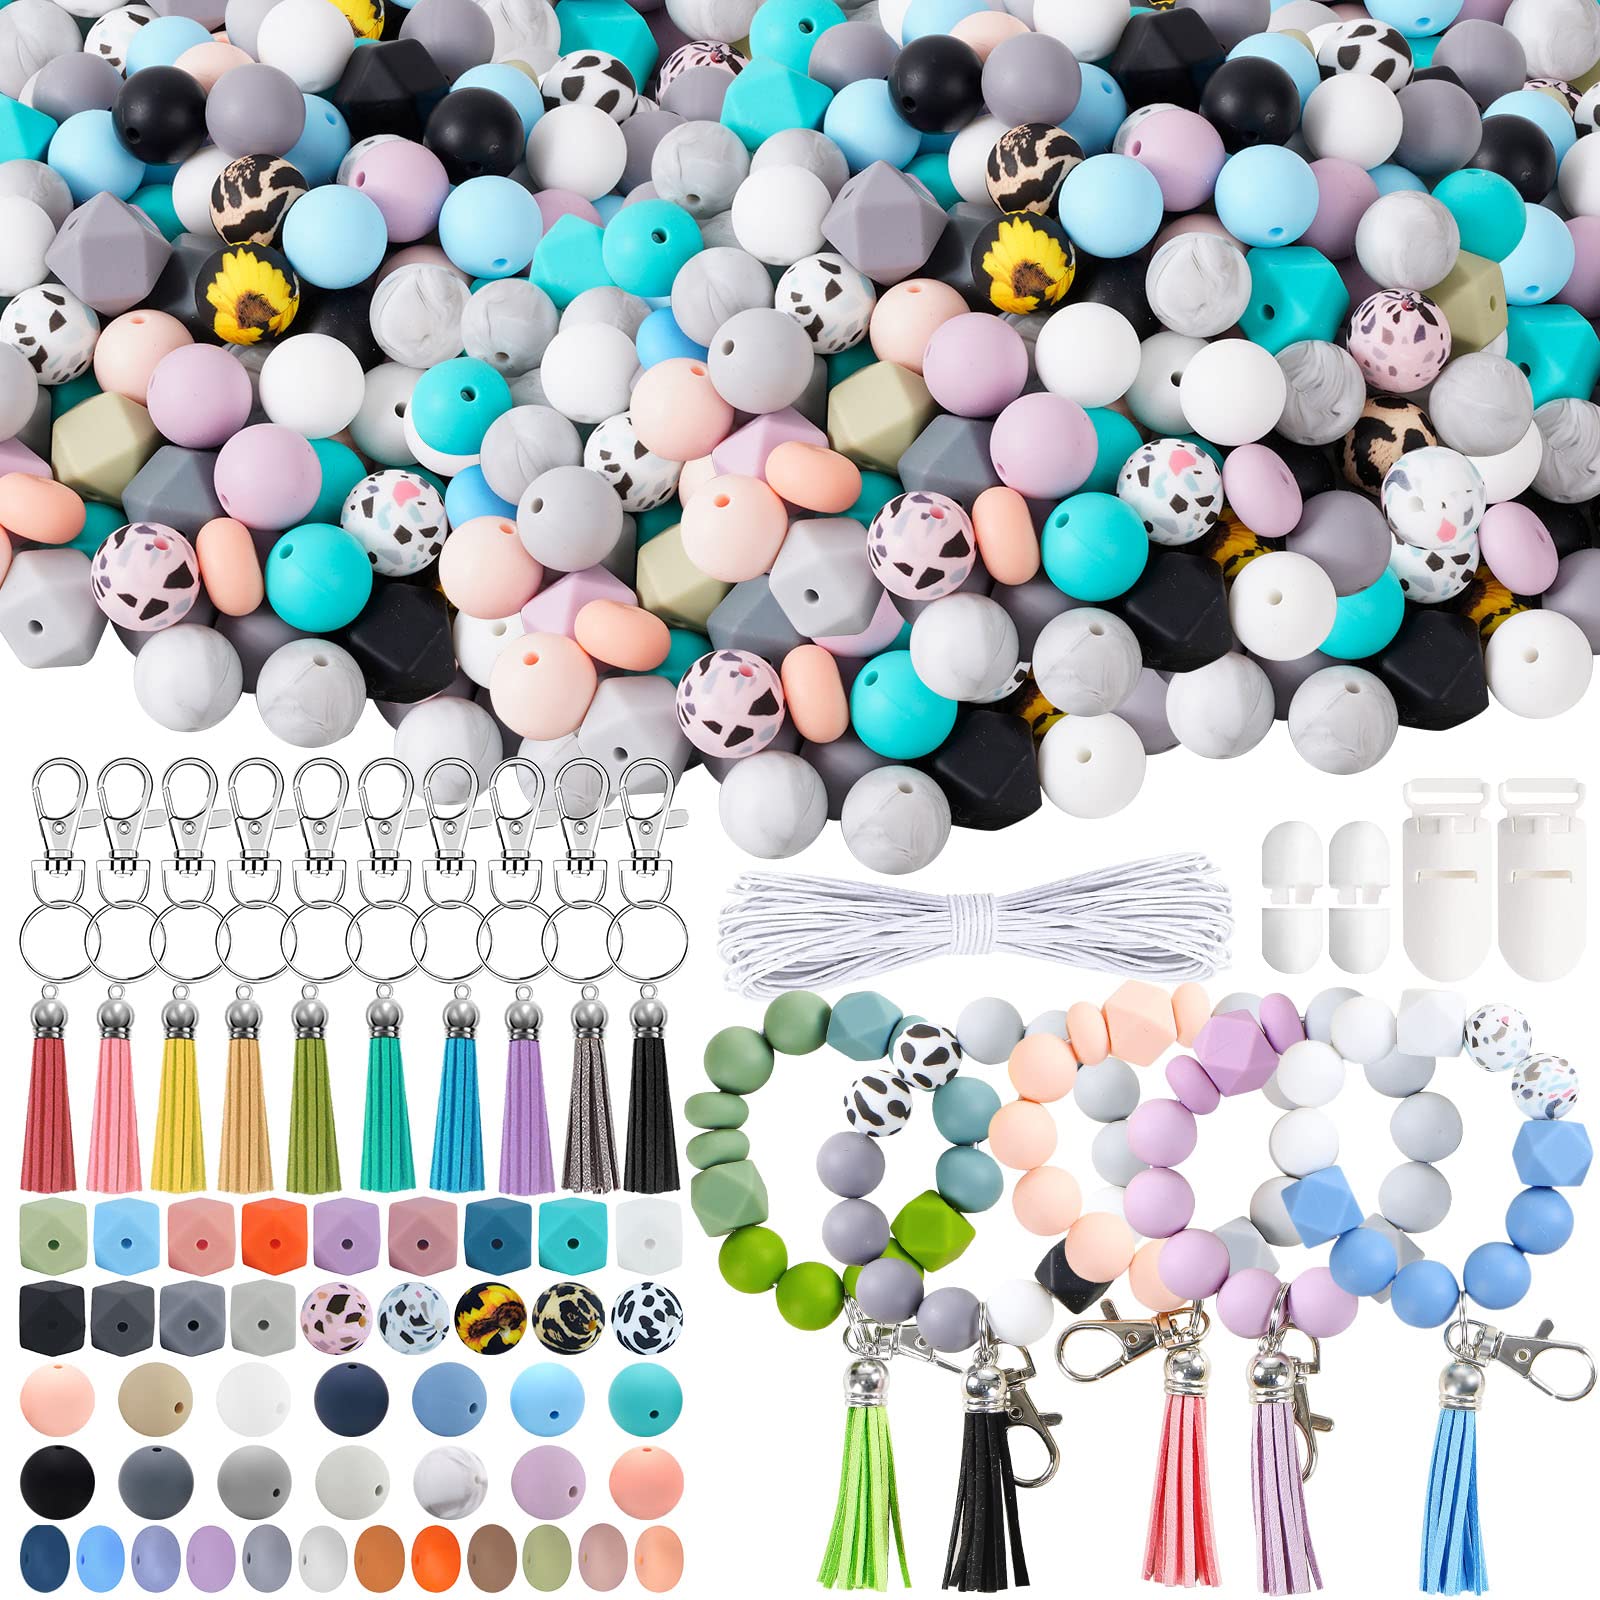 Tsinlan.ayn 15mm Silicone Beads Kit for Keychain Making, 229 Pcs Bulk  Assorted Silicone Beaded Set with Box for Necklace Bracelet Pen Pacifier  Clips